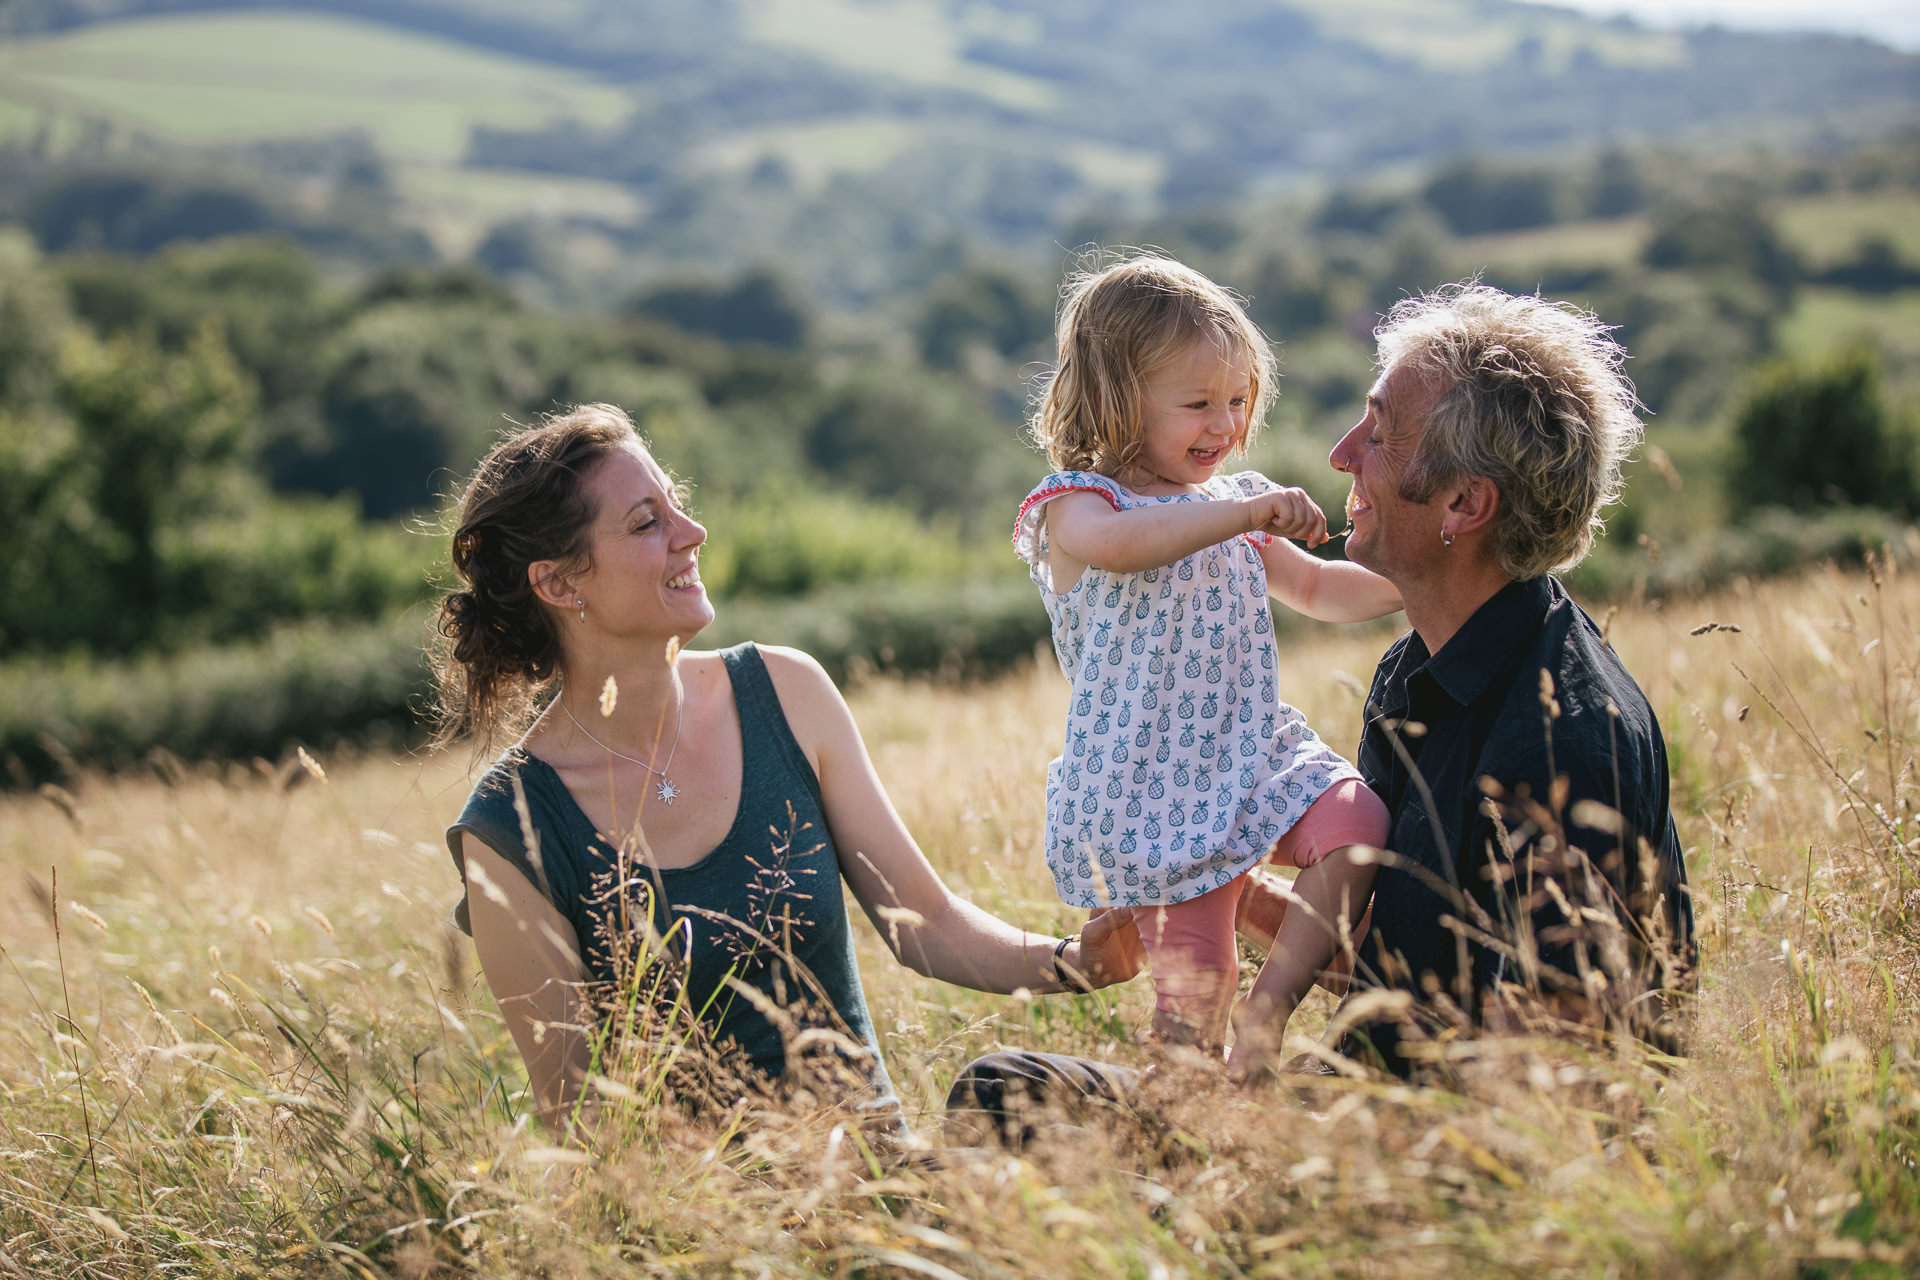 Two parents with a young daughter in a field